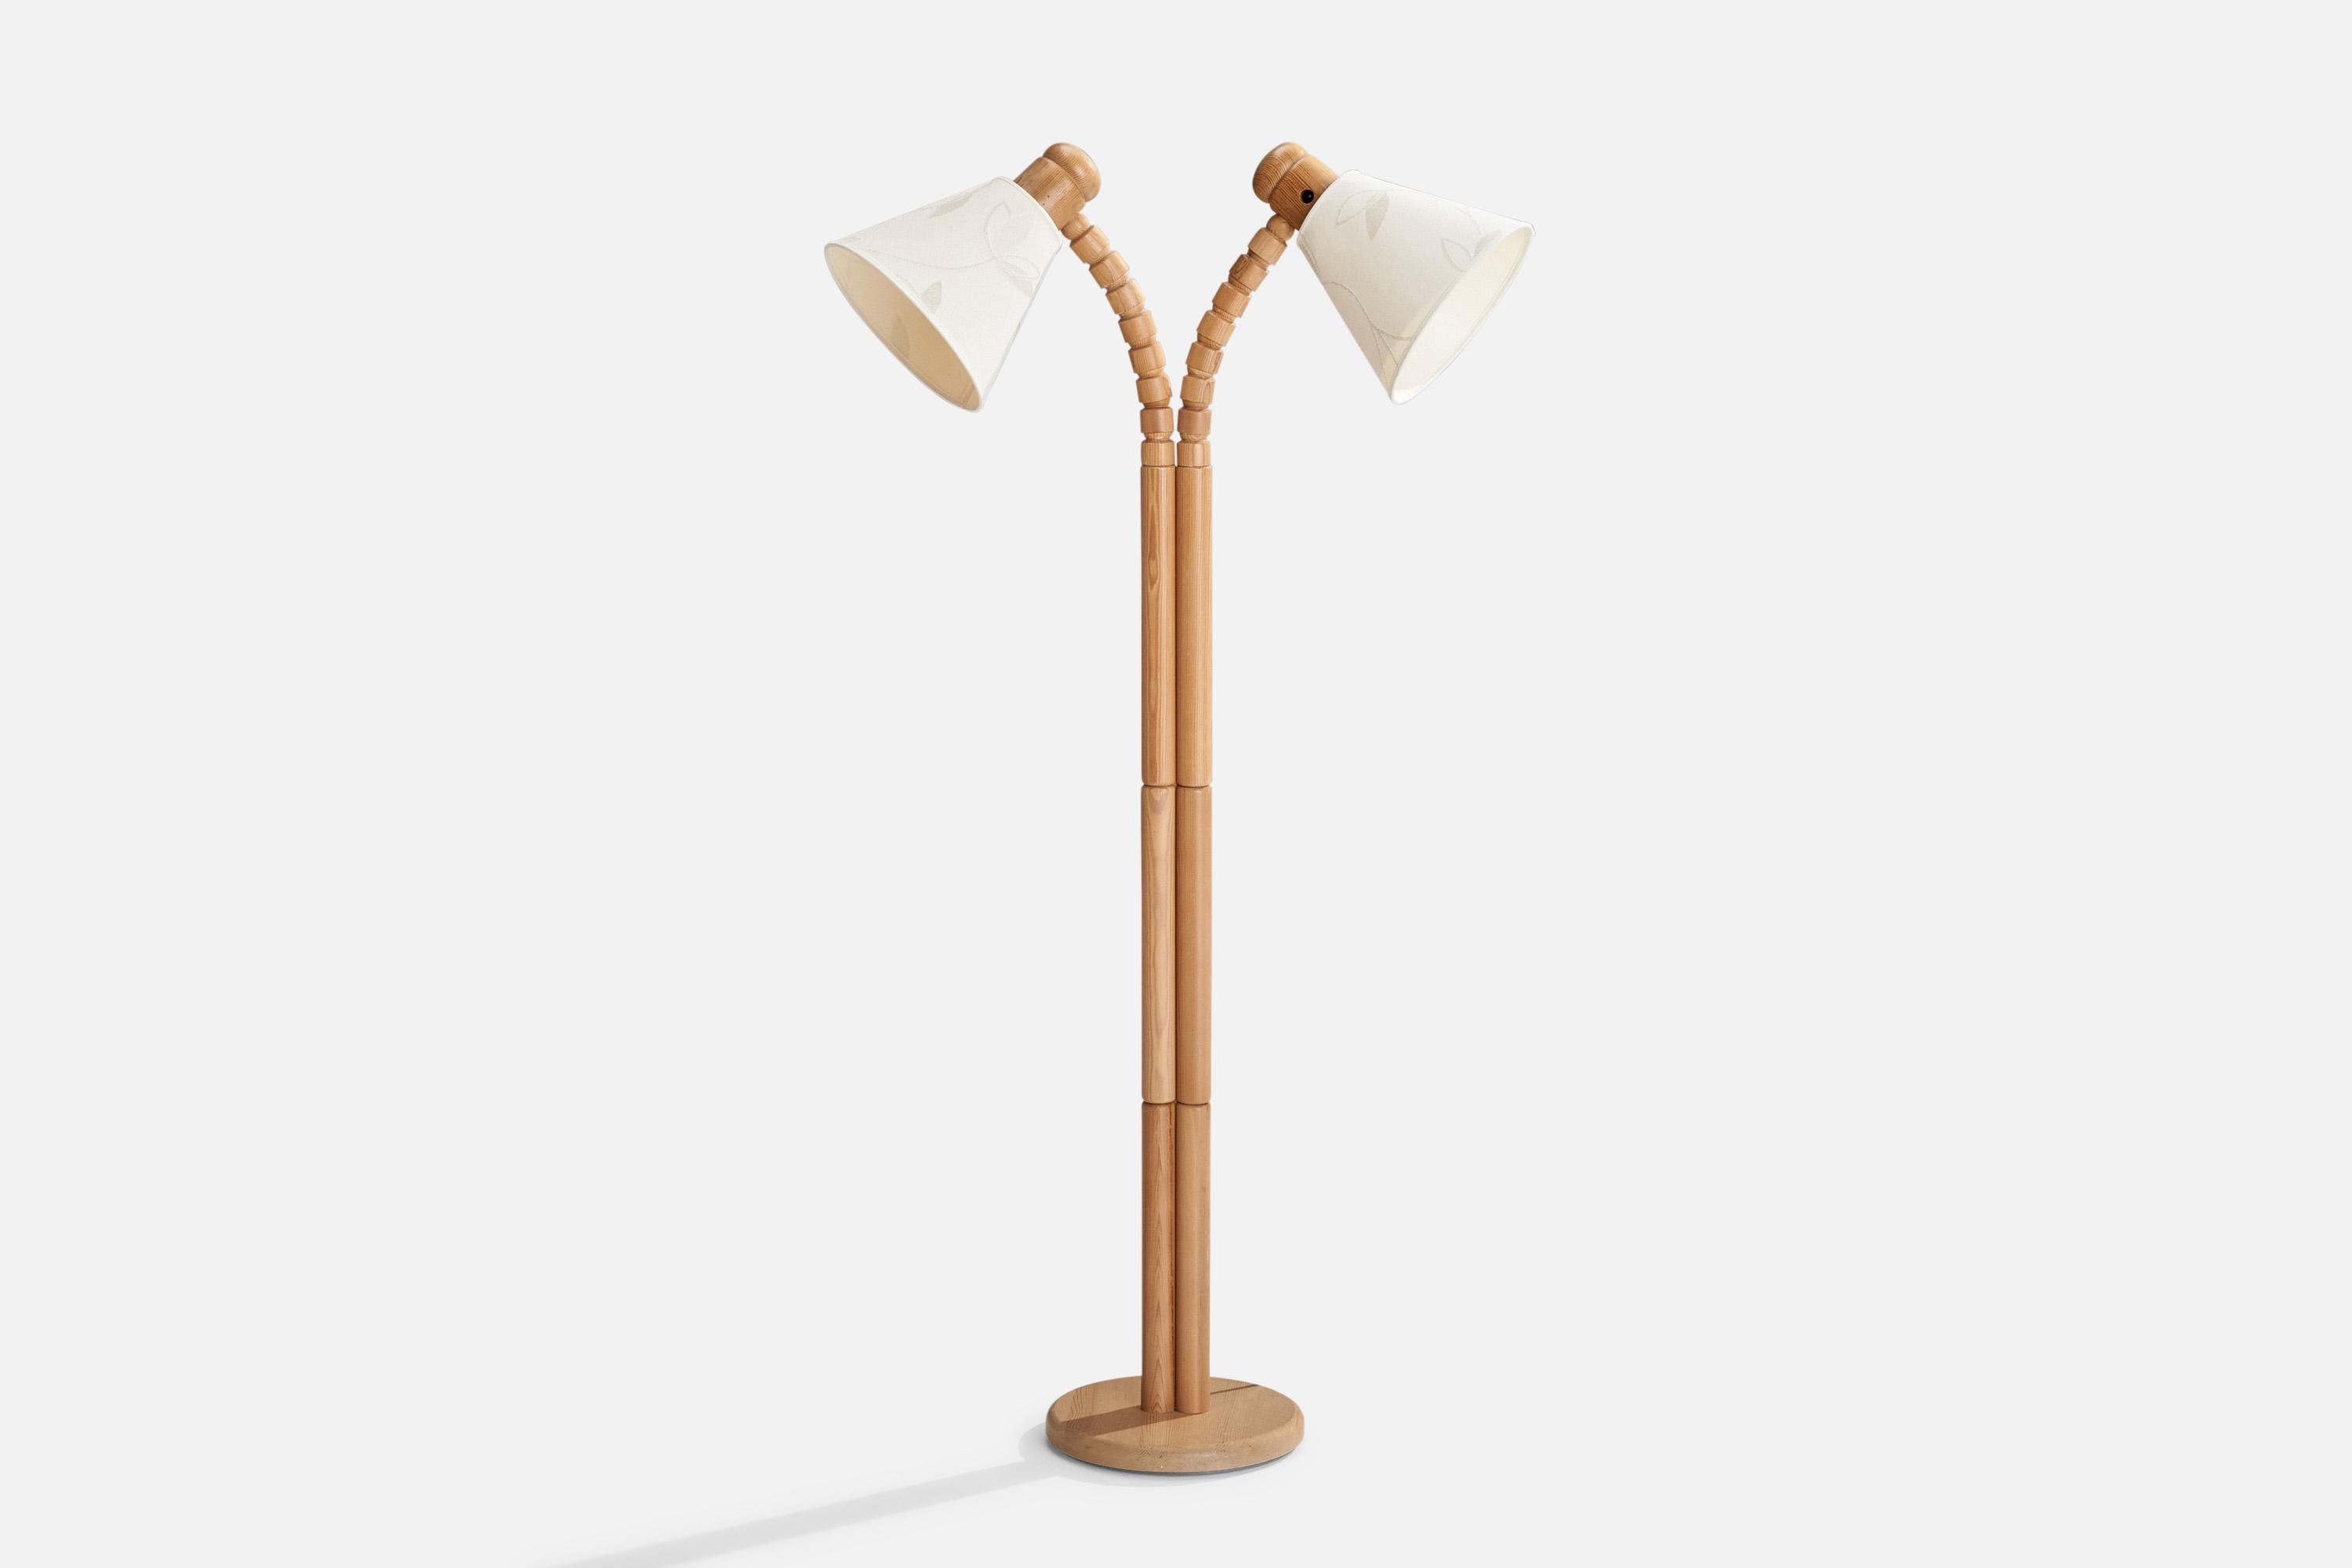 An adjustable two-armed pine and fabric floor lamp designed and produced in Sweden, c. 1970s.

Overall Dimensions (inches):52” H x 25.25” W x 21” D
Stated dimensions include shade.
Bulb Specifications: E-26 Bulb
Number of Sockets: 2
All lighting